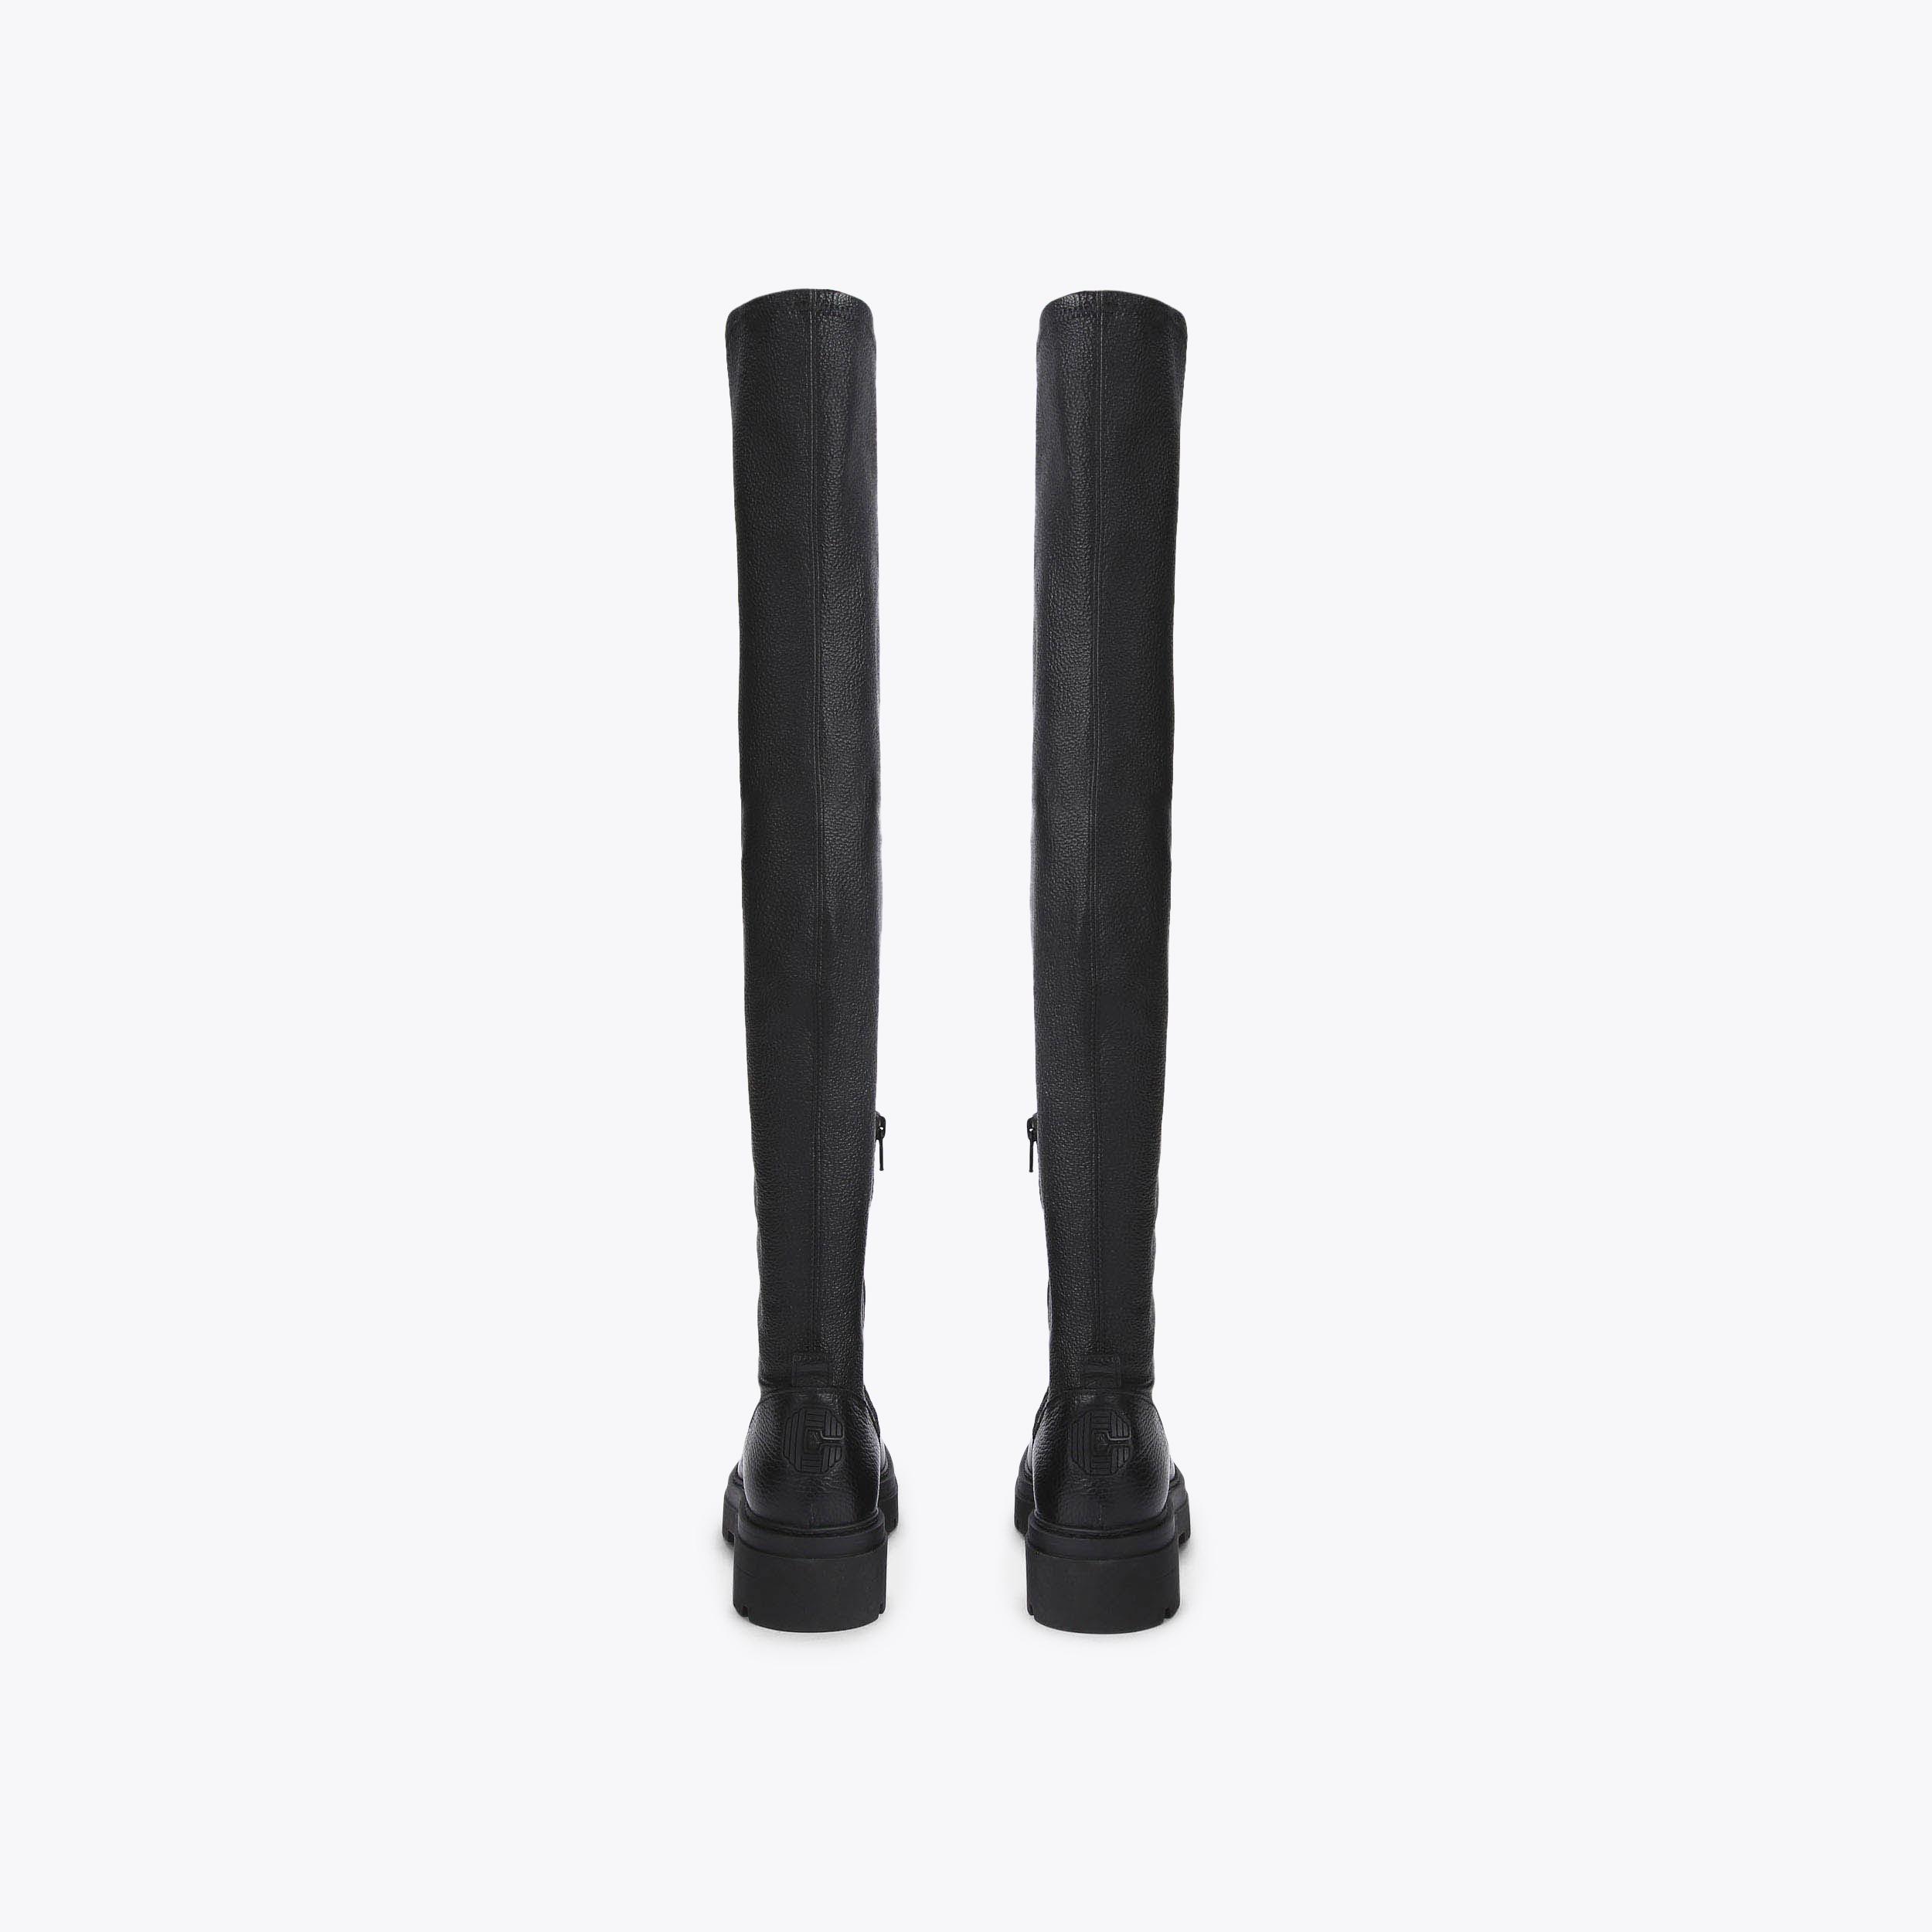 SINCERE THIGH HIGH Black Thigh High Leather Boots by CARVELA